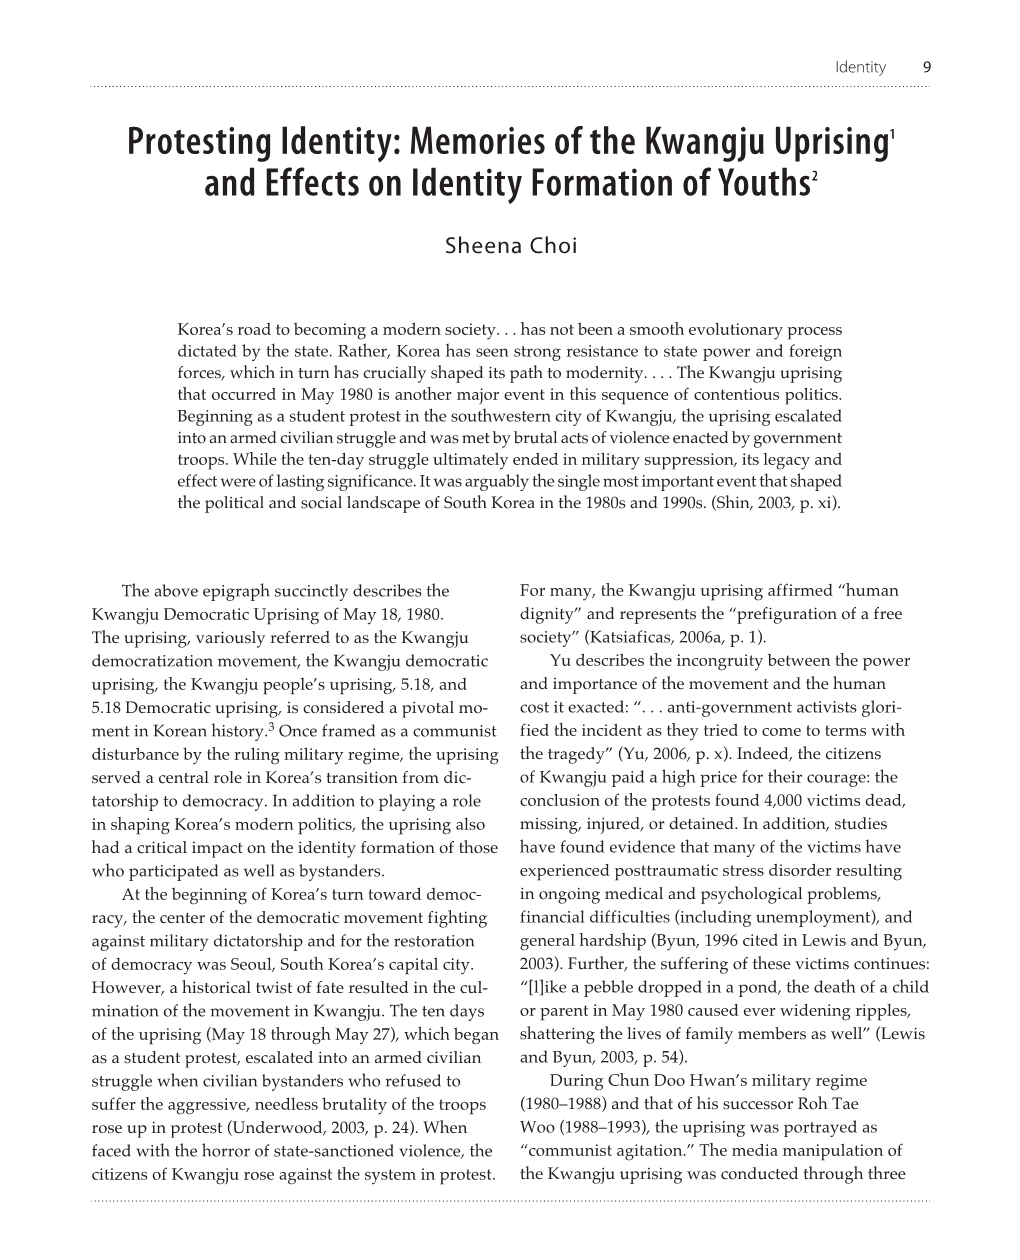 Protesting Identity: Memories of the Kwangju Uprising1 and Effects on Identity Formation of Youths2